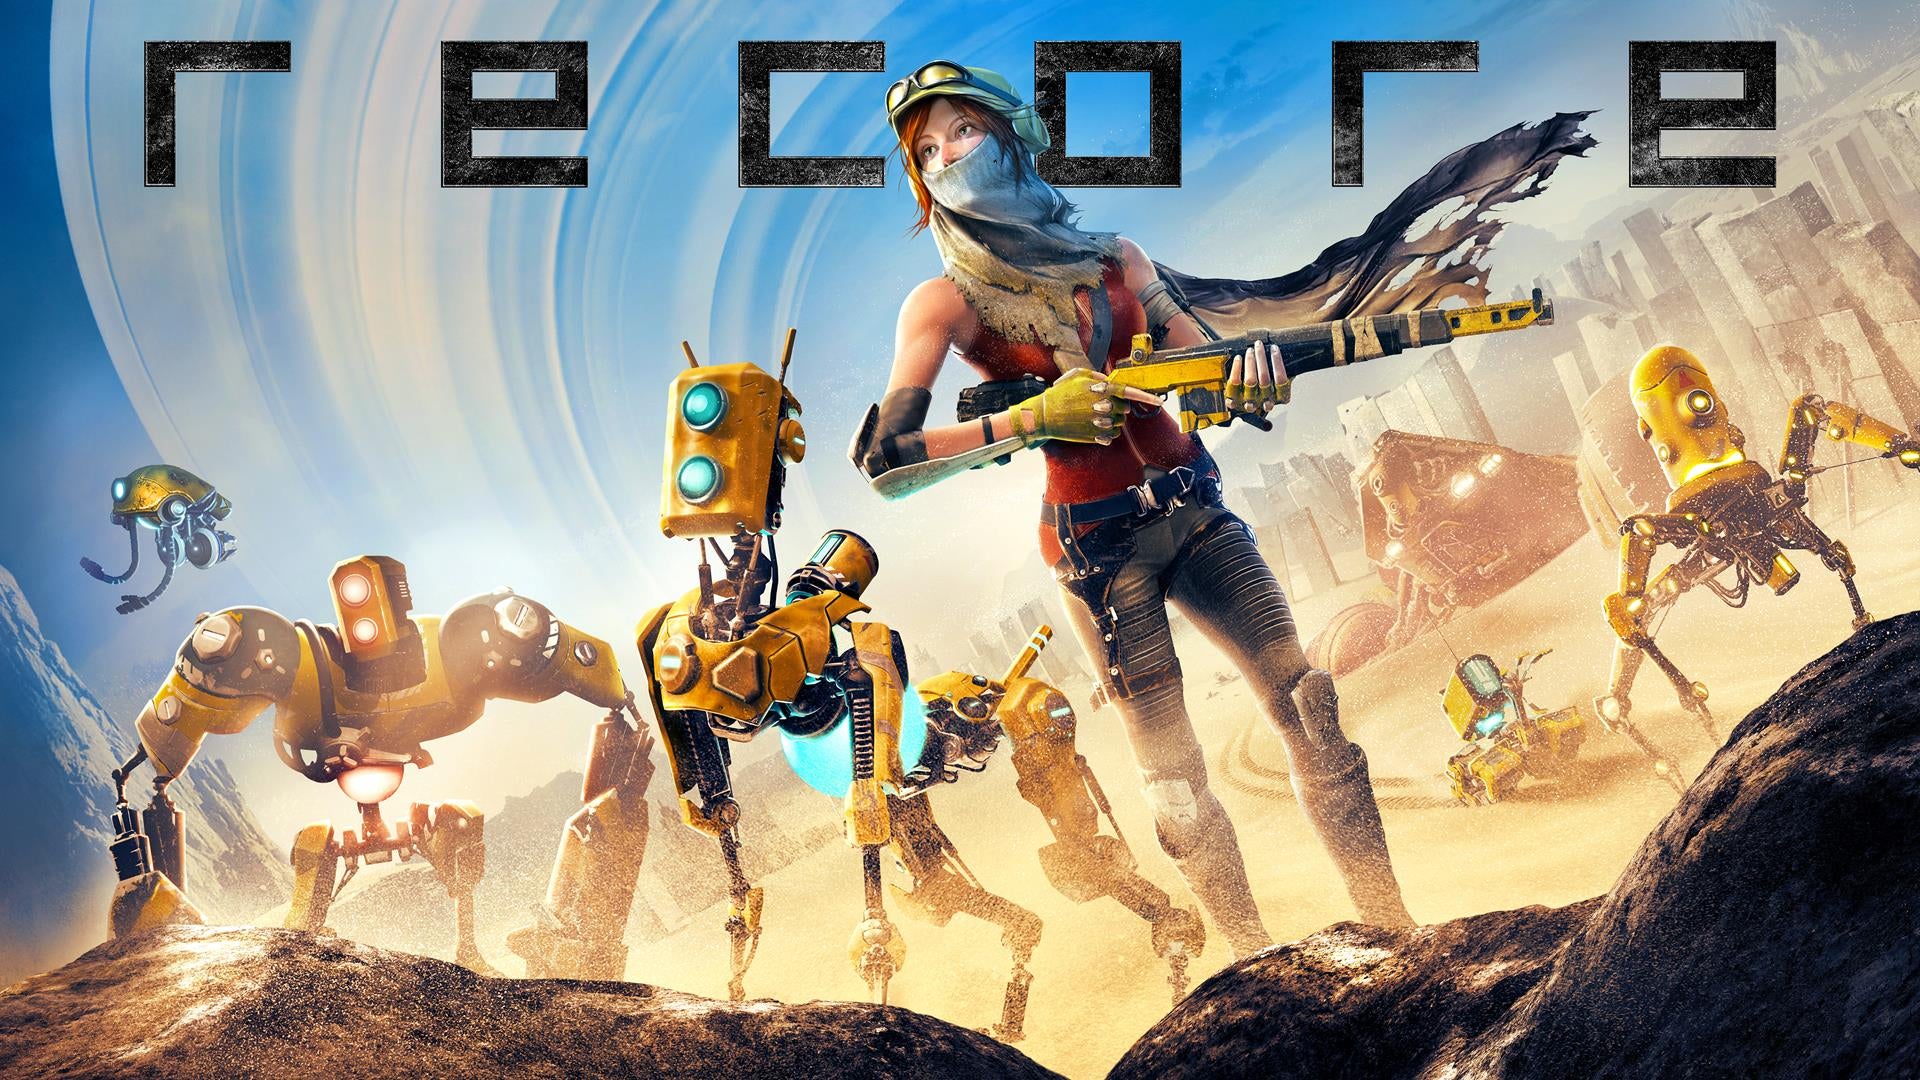 Image for Hands-on with Xbox One exclusive ReCore: a little bit Metroid Prime, a little bit Mega Man